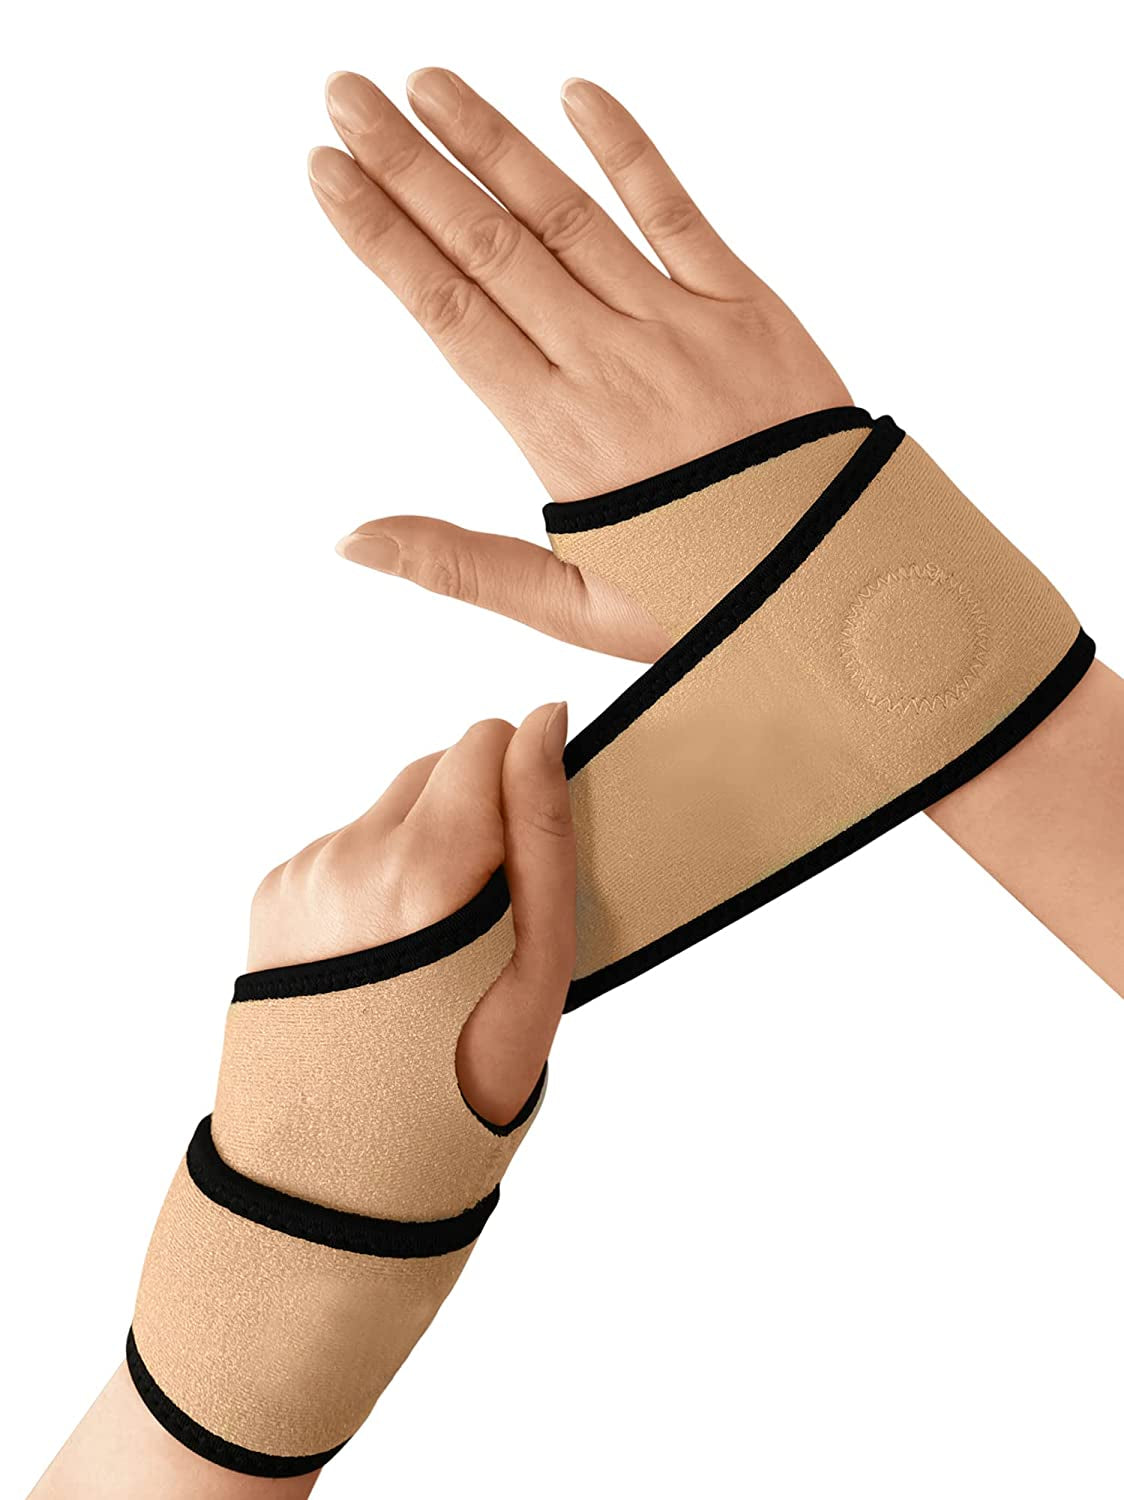 Doctor Developed Premium [Single] Carpal Tunnel Night Wrist Brace & Support (With Splint) & Doctor Written Handbook - Fully Adjustable with Comfort Padding & Shaping